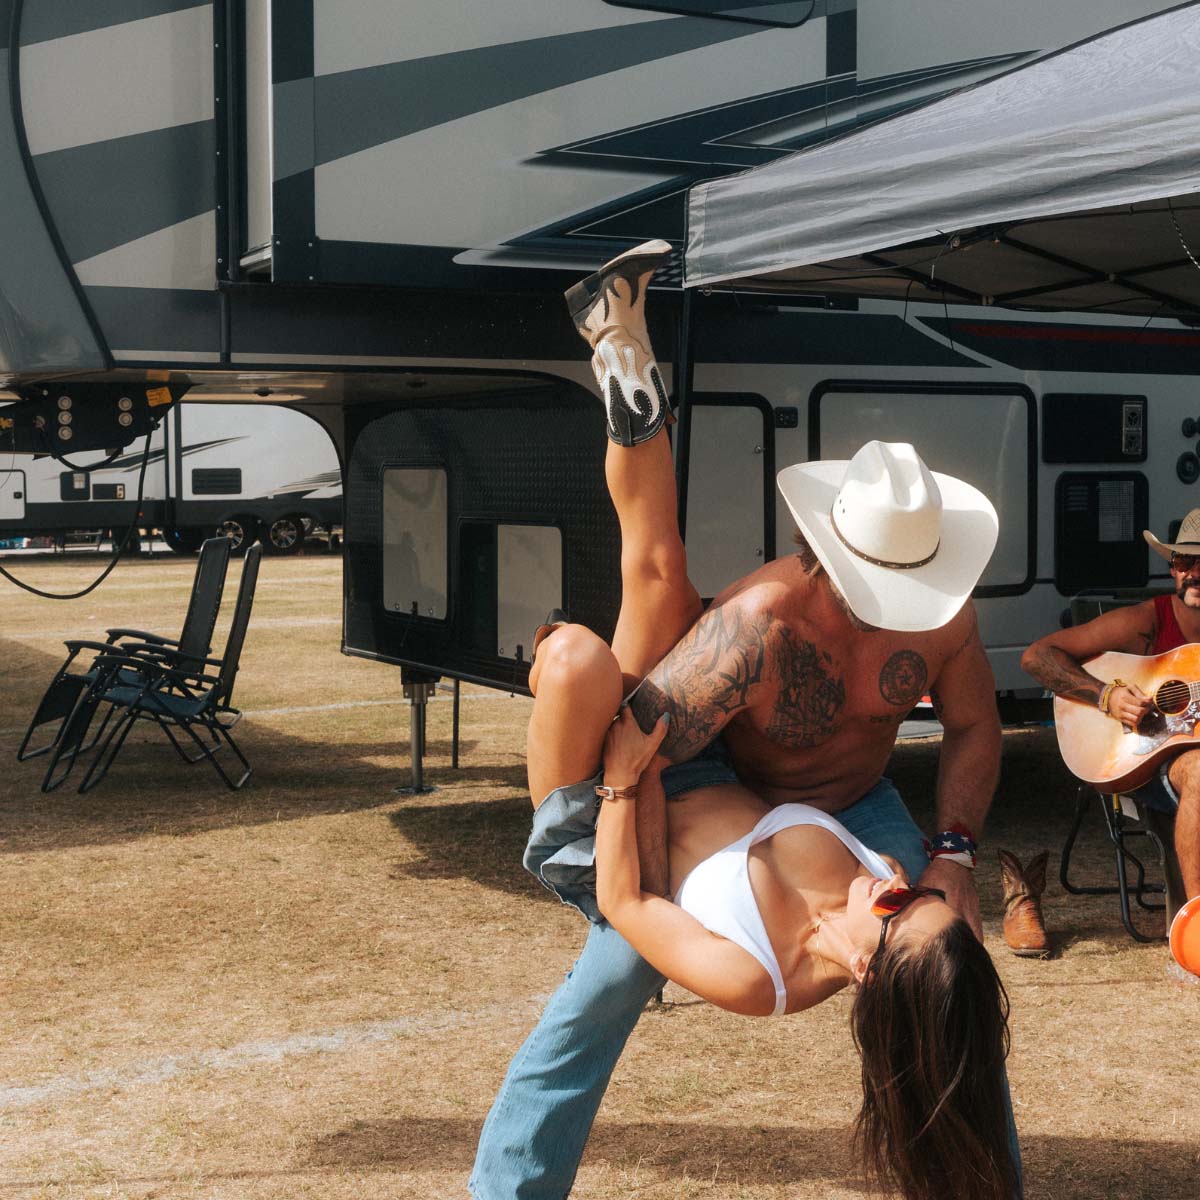 Two people dancing at RV site